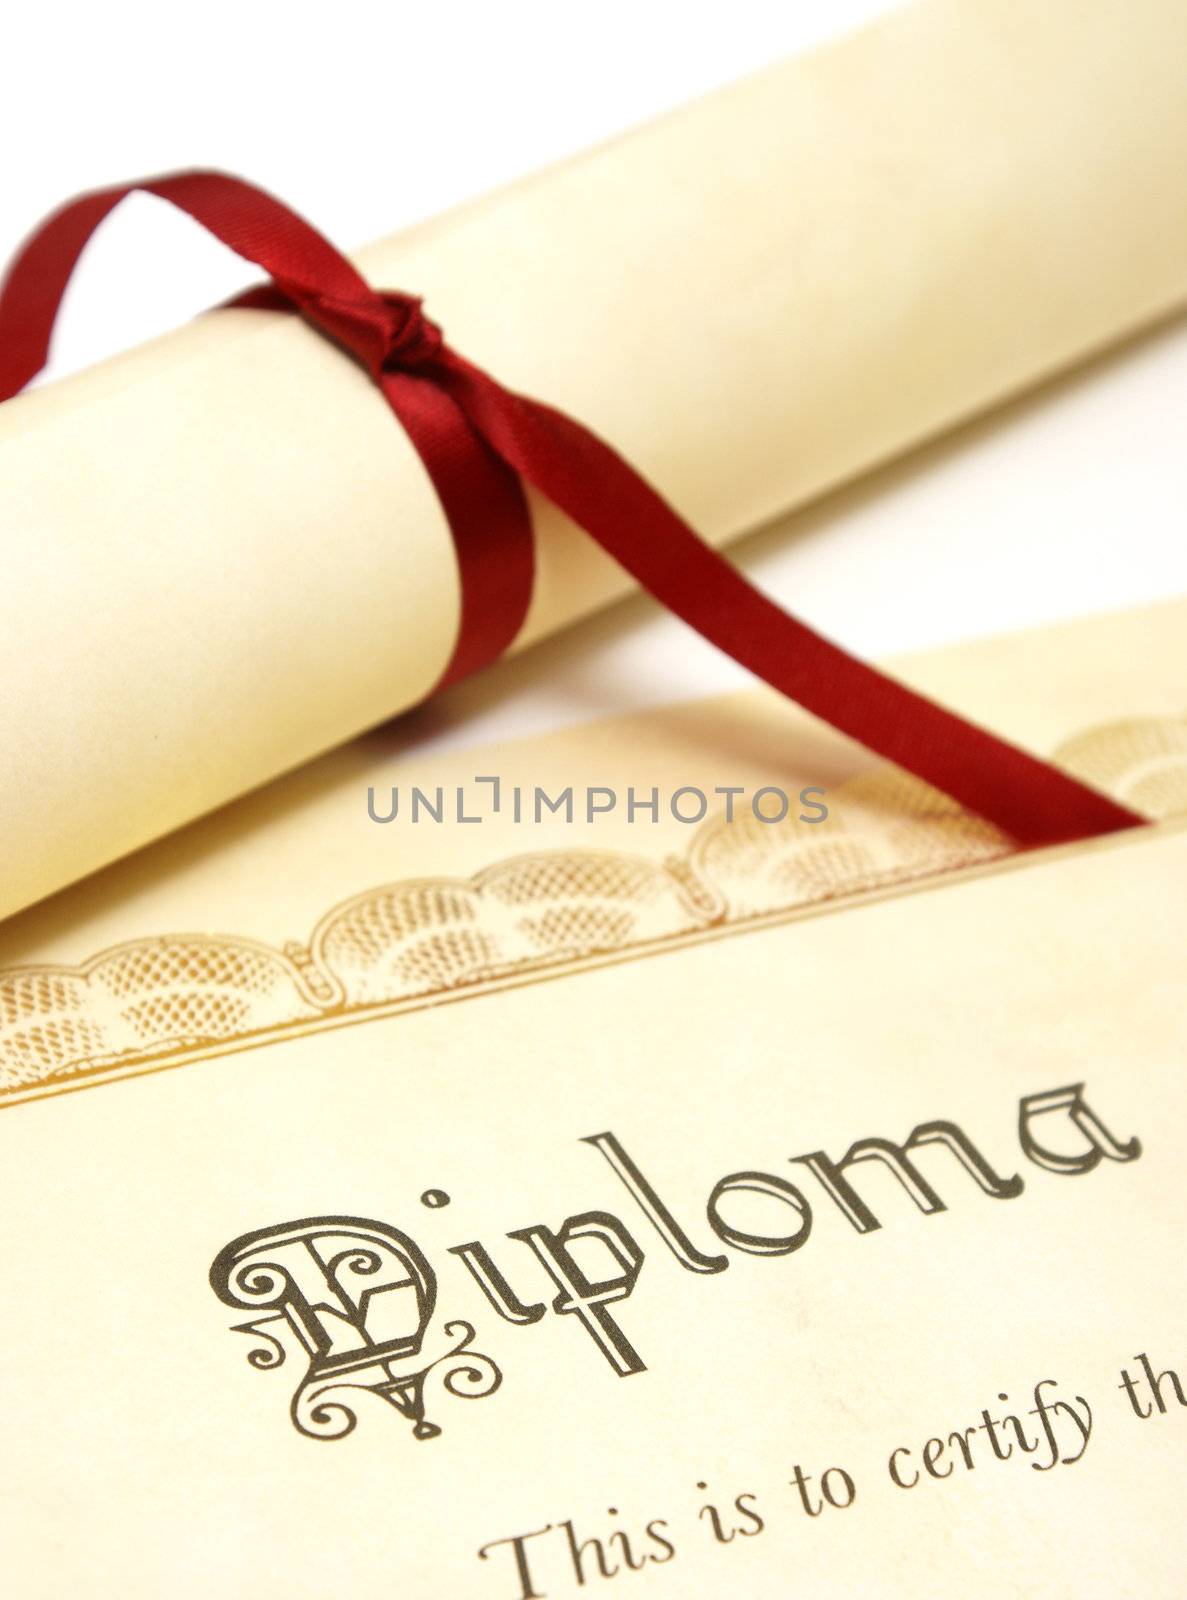 A diploma over white represents a high achieving student.